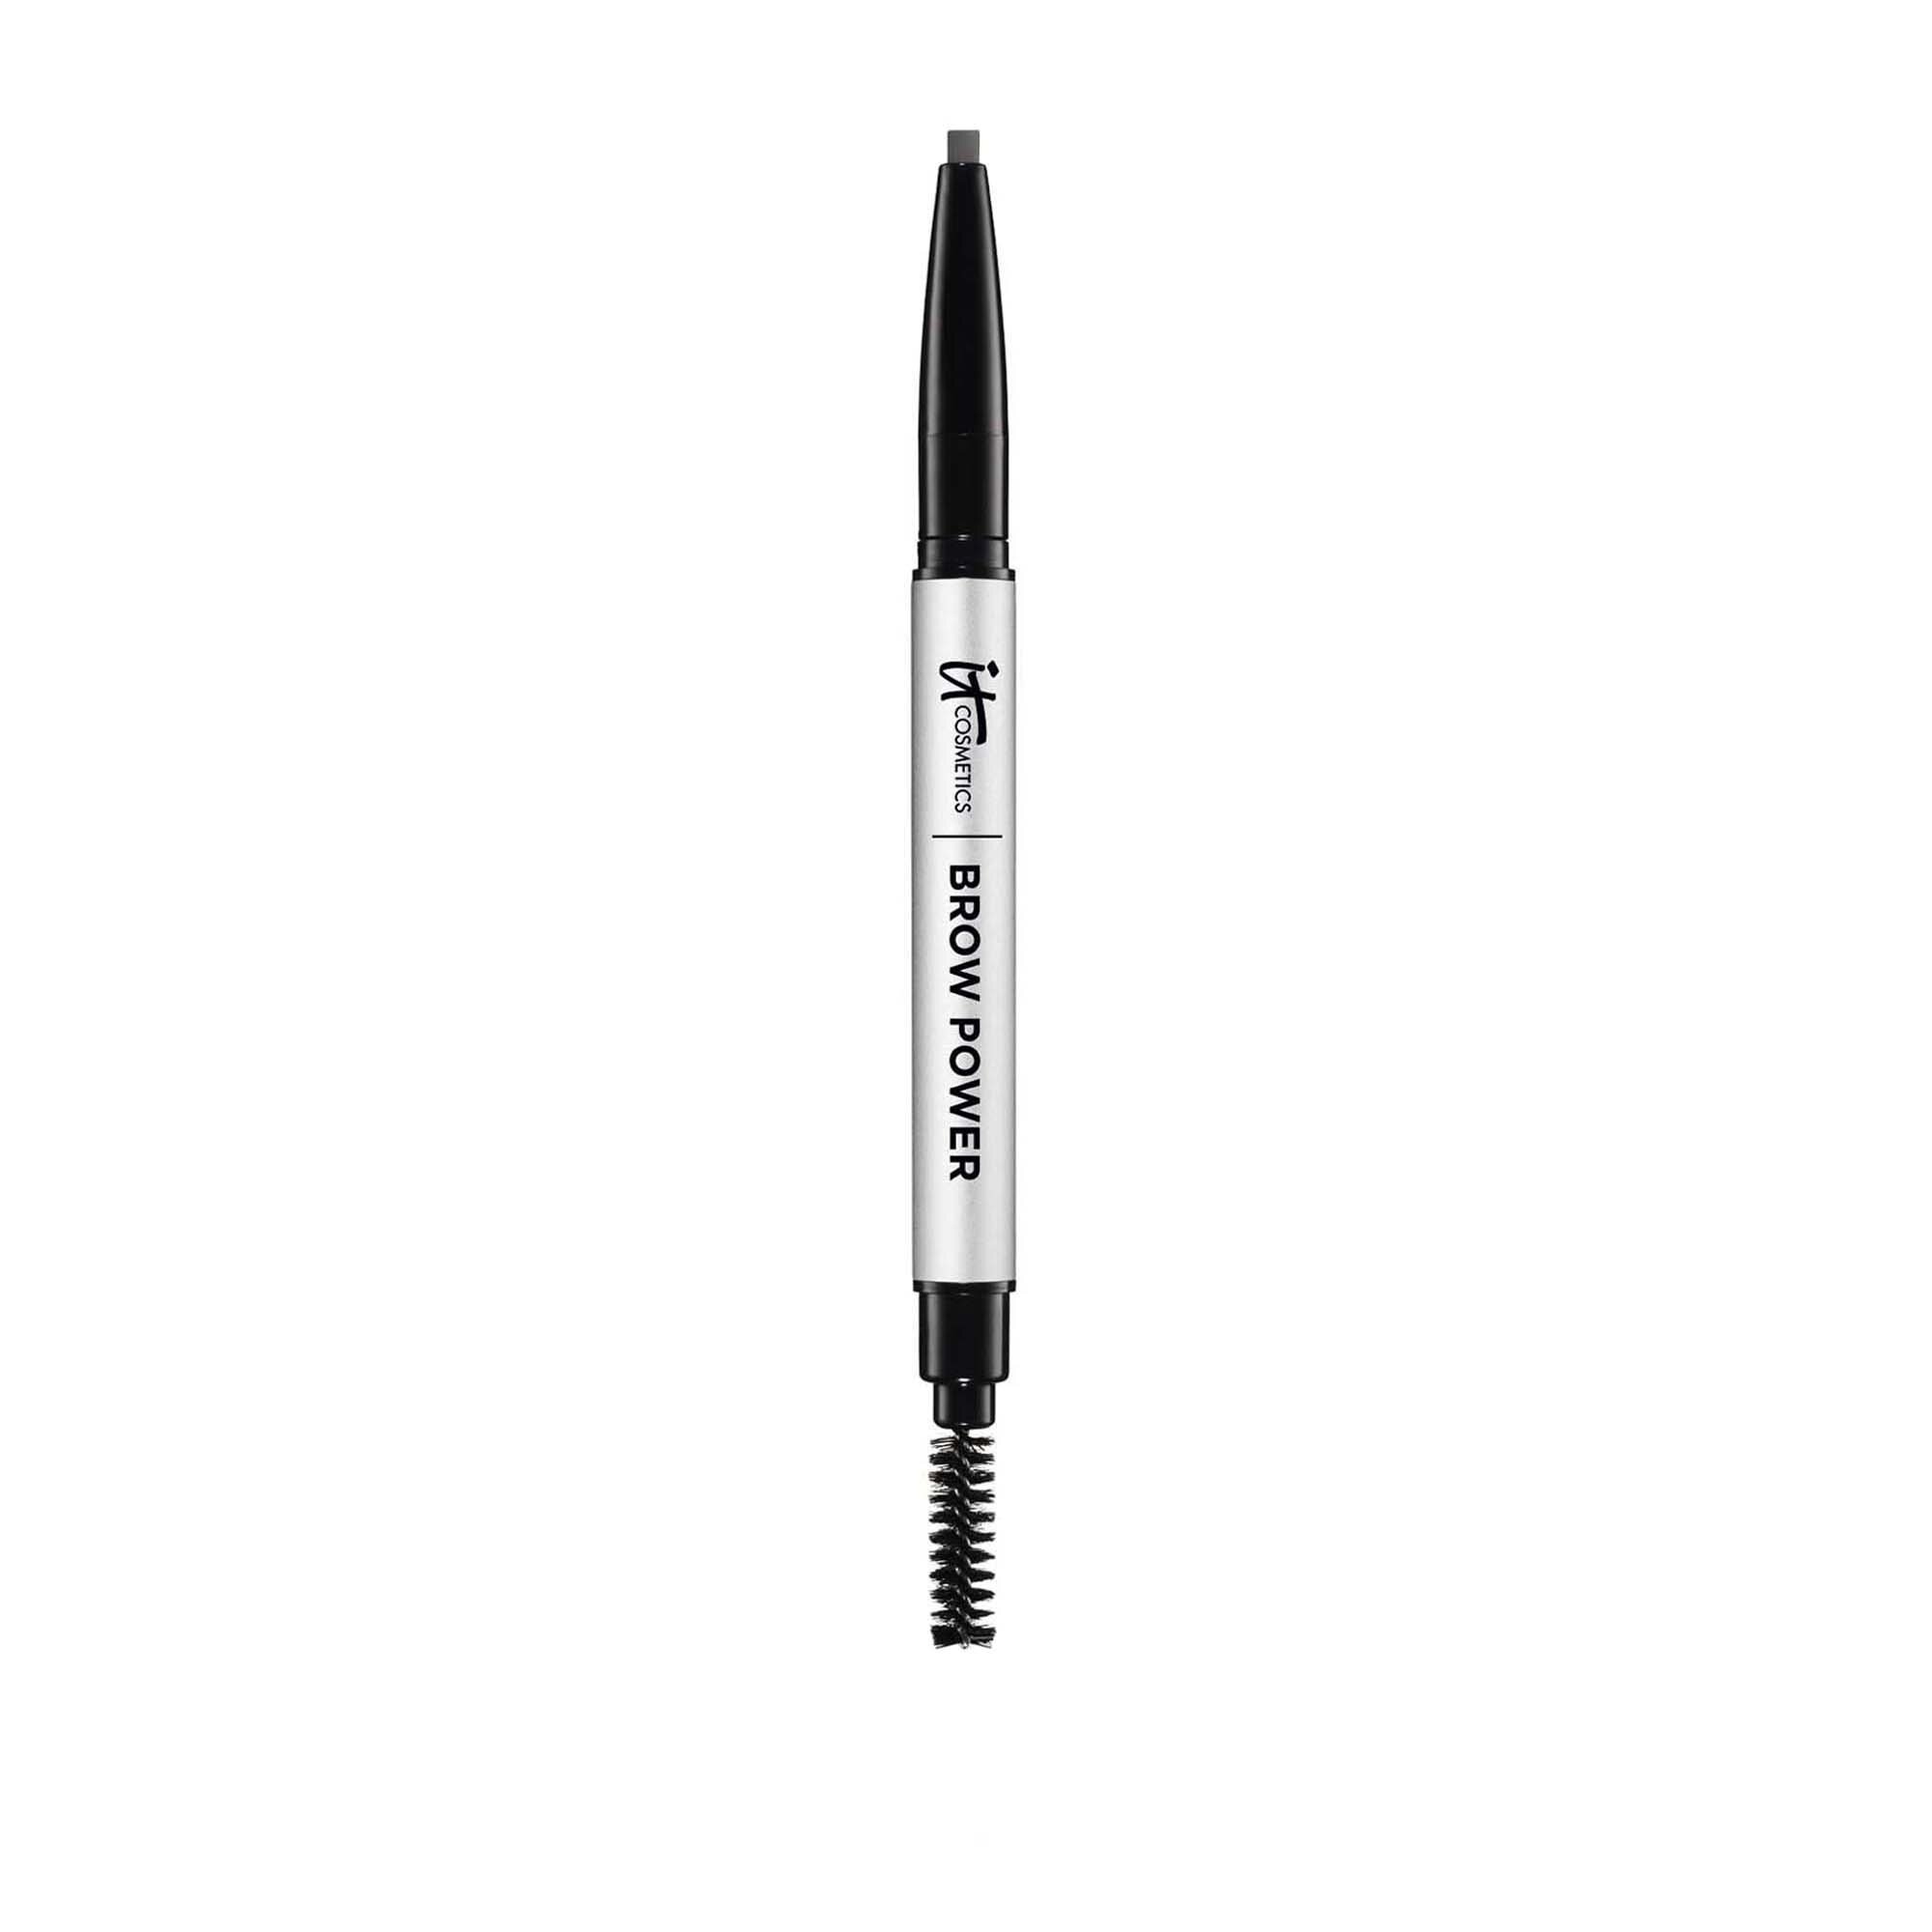 brow-power-pencil-rgb-r3-universal-taupe-without-reflection-full.jpg